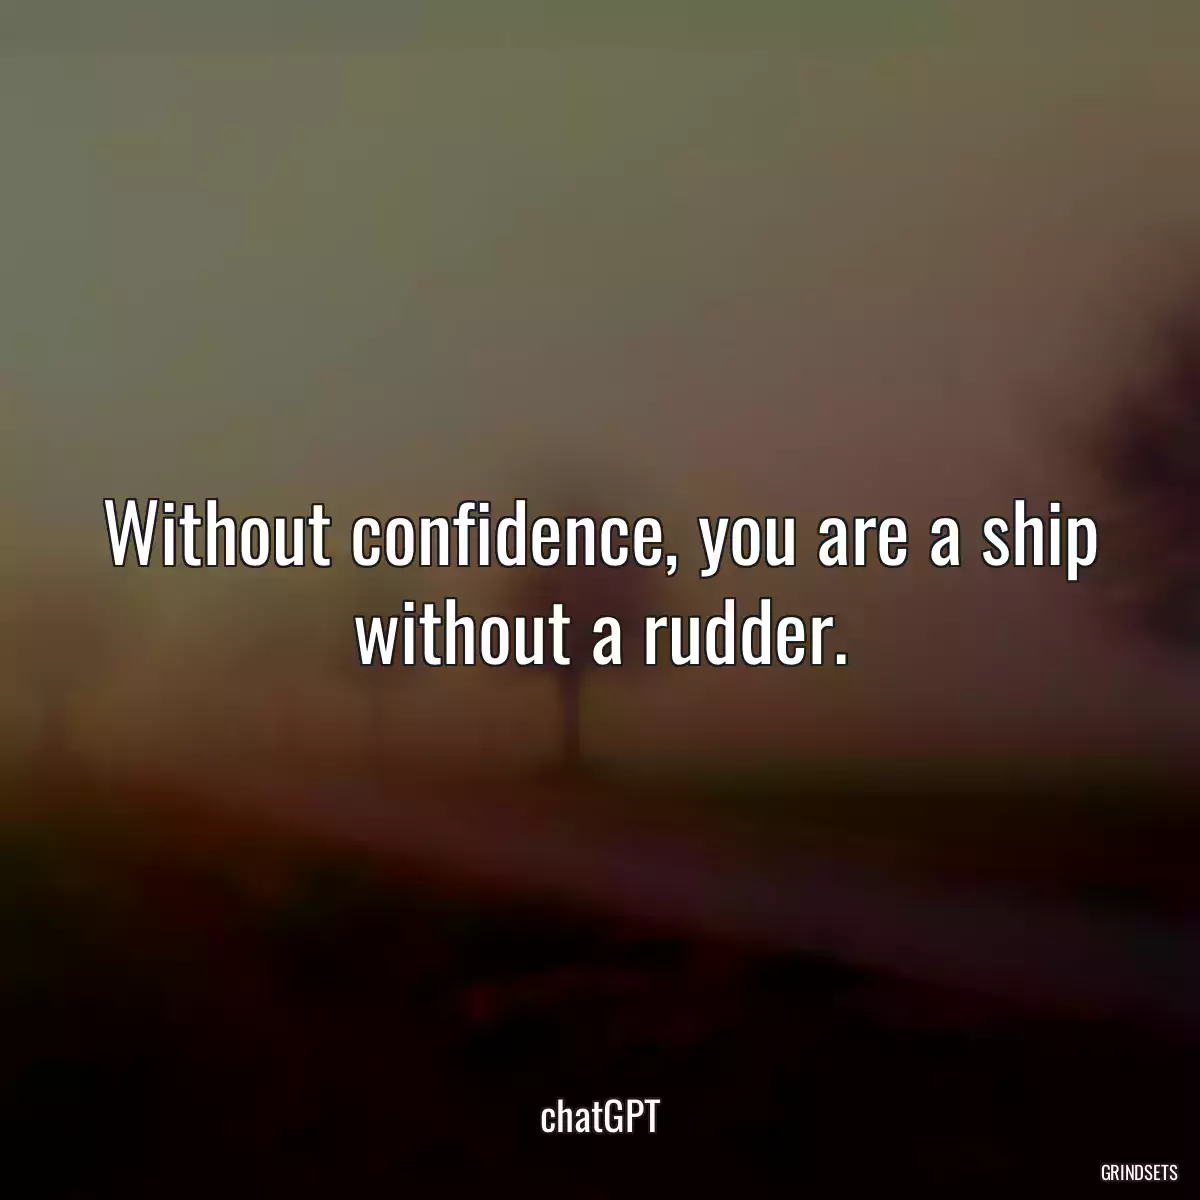 Without confidence, you are a ship without a rudder.